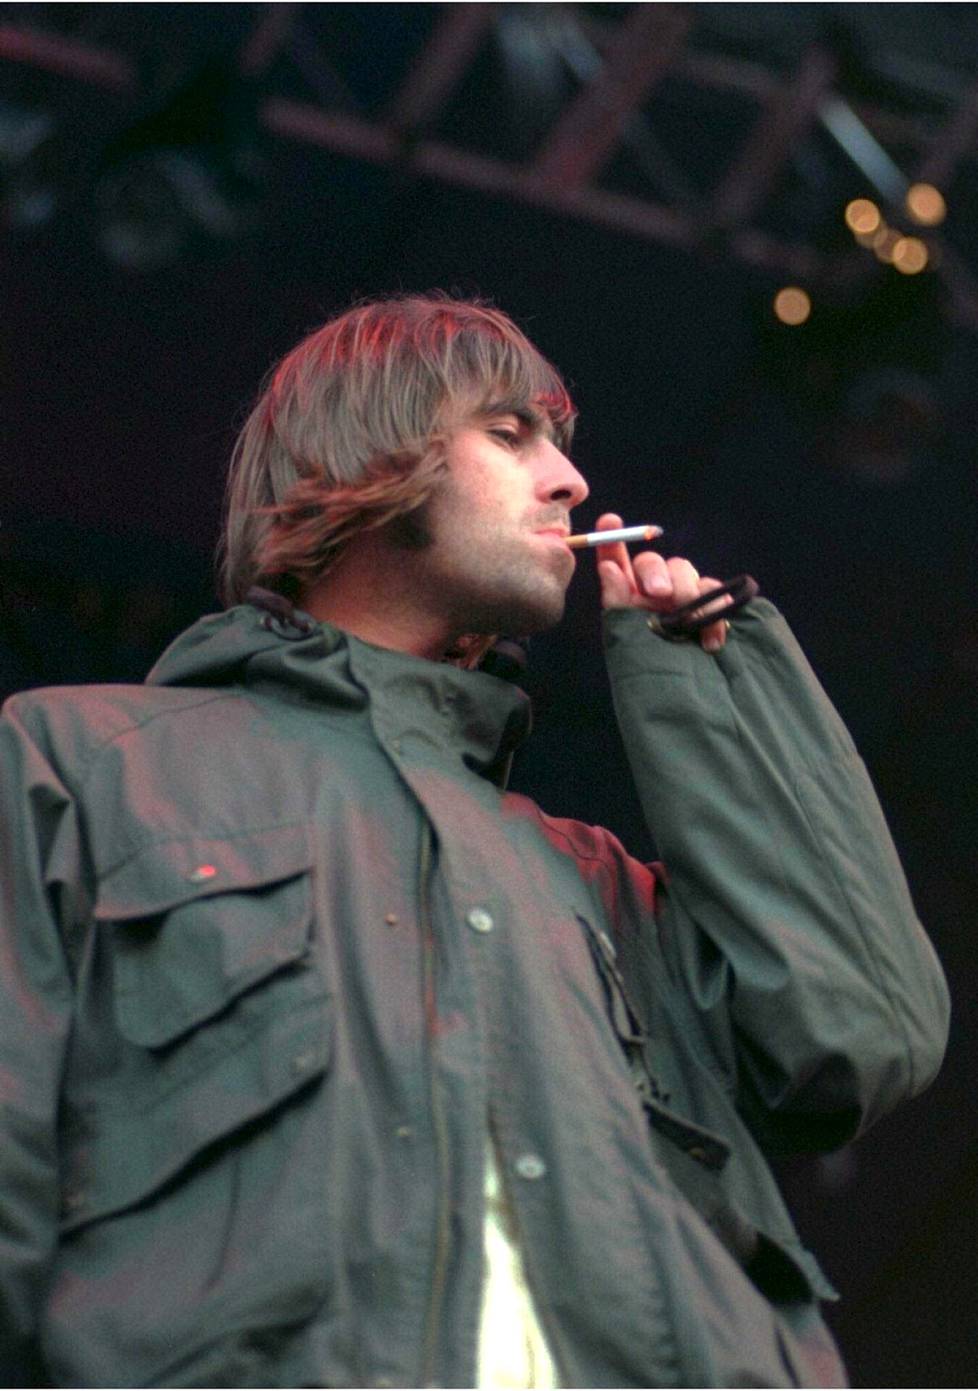 Oasis was at the peak of his career in 1996. Pictured is Liam Gallagher on stage in Stockholm that summer.